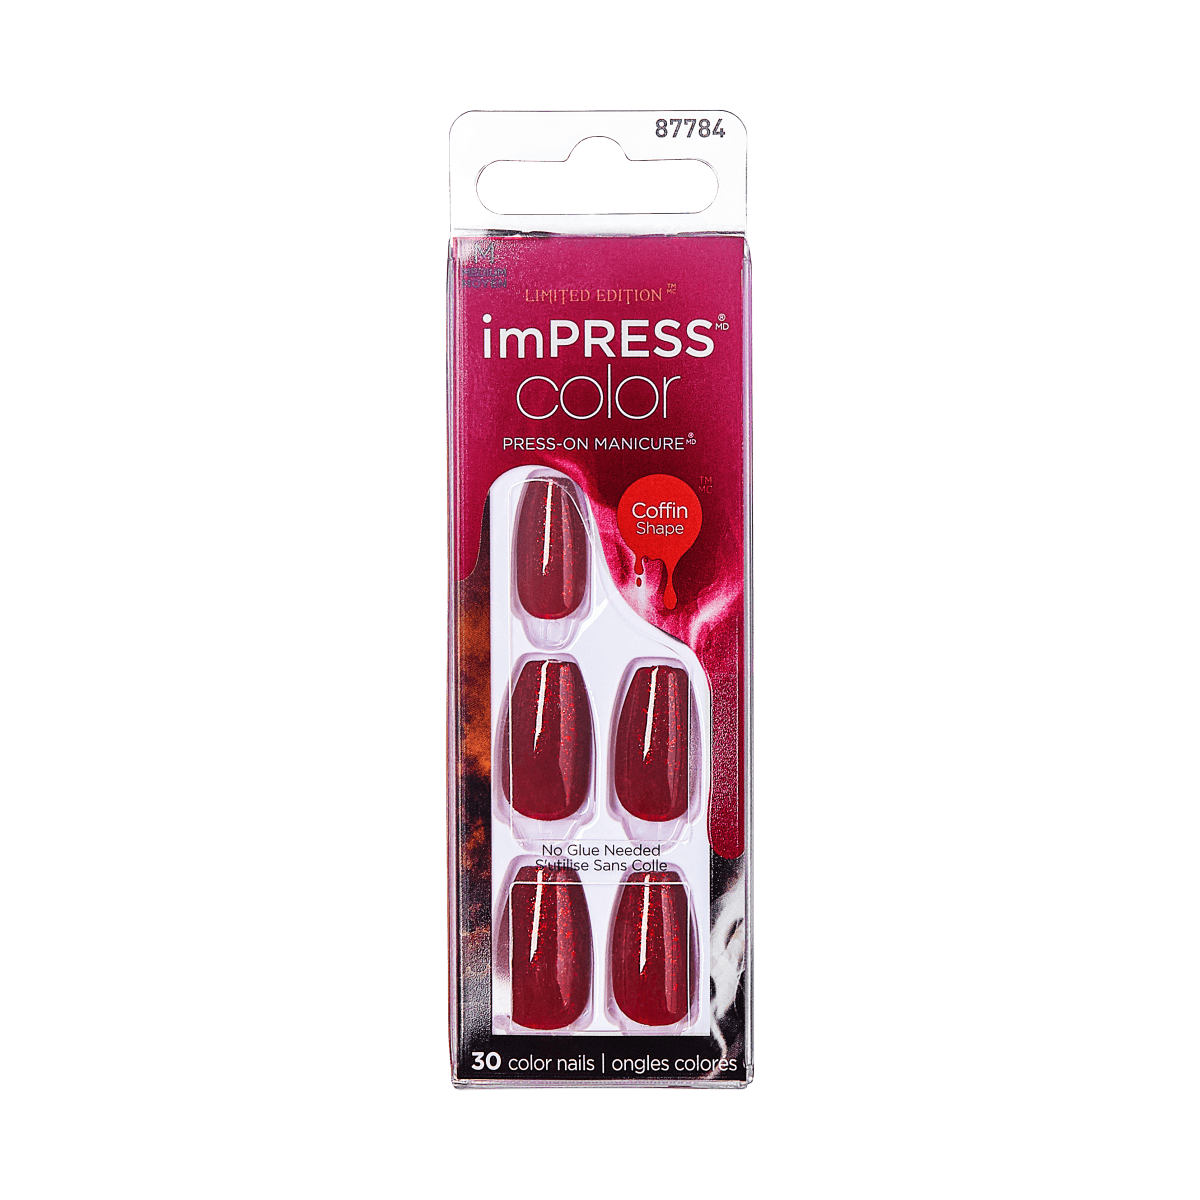 imPRESS Color Press-On Manicure Halloween - Coffin - Witcha up to